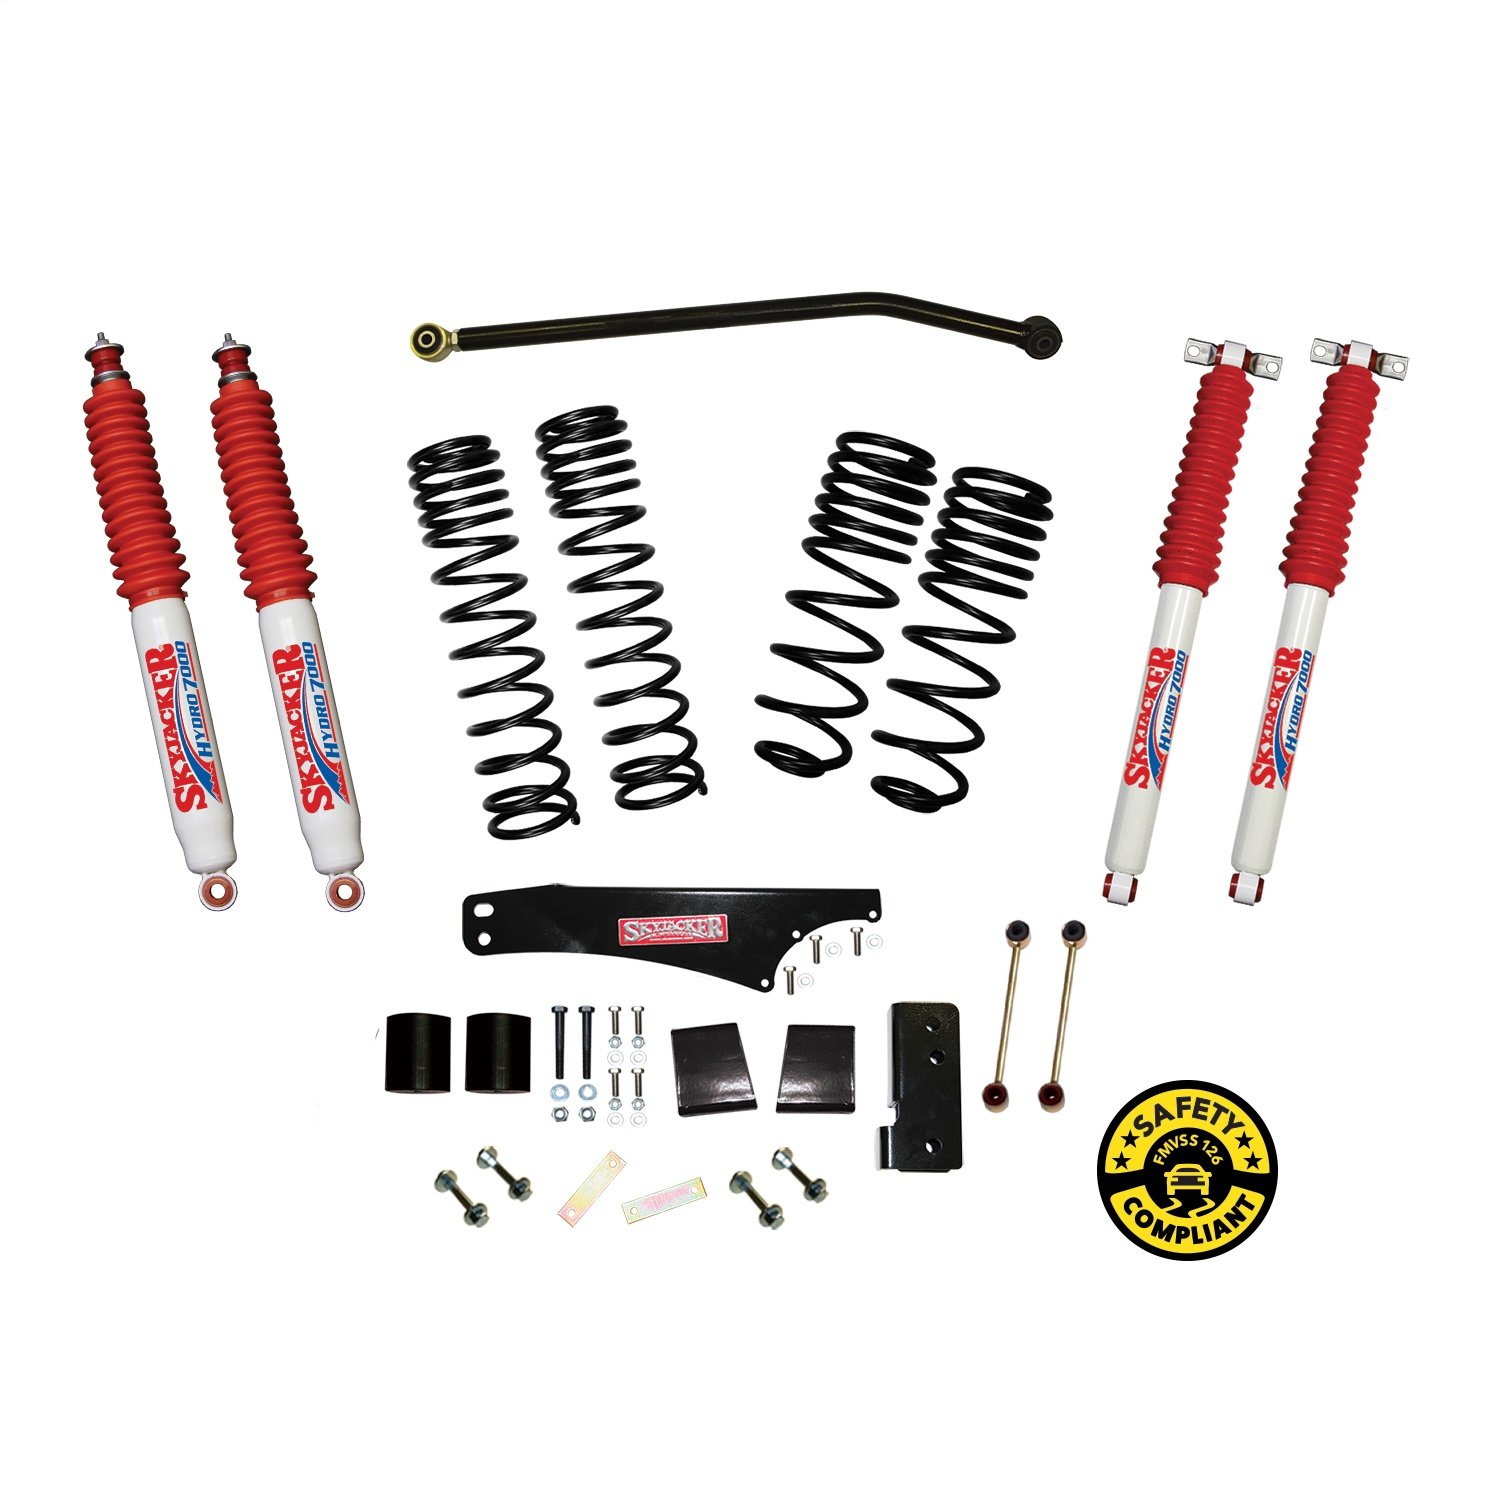 JK40BPHLT Front and Rear Suspension Lift Kit, Lift Amount: 4 in. Front/4 in. Rear